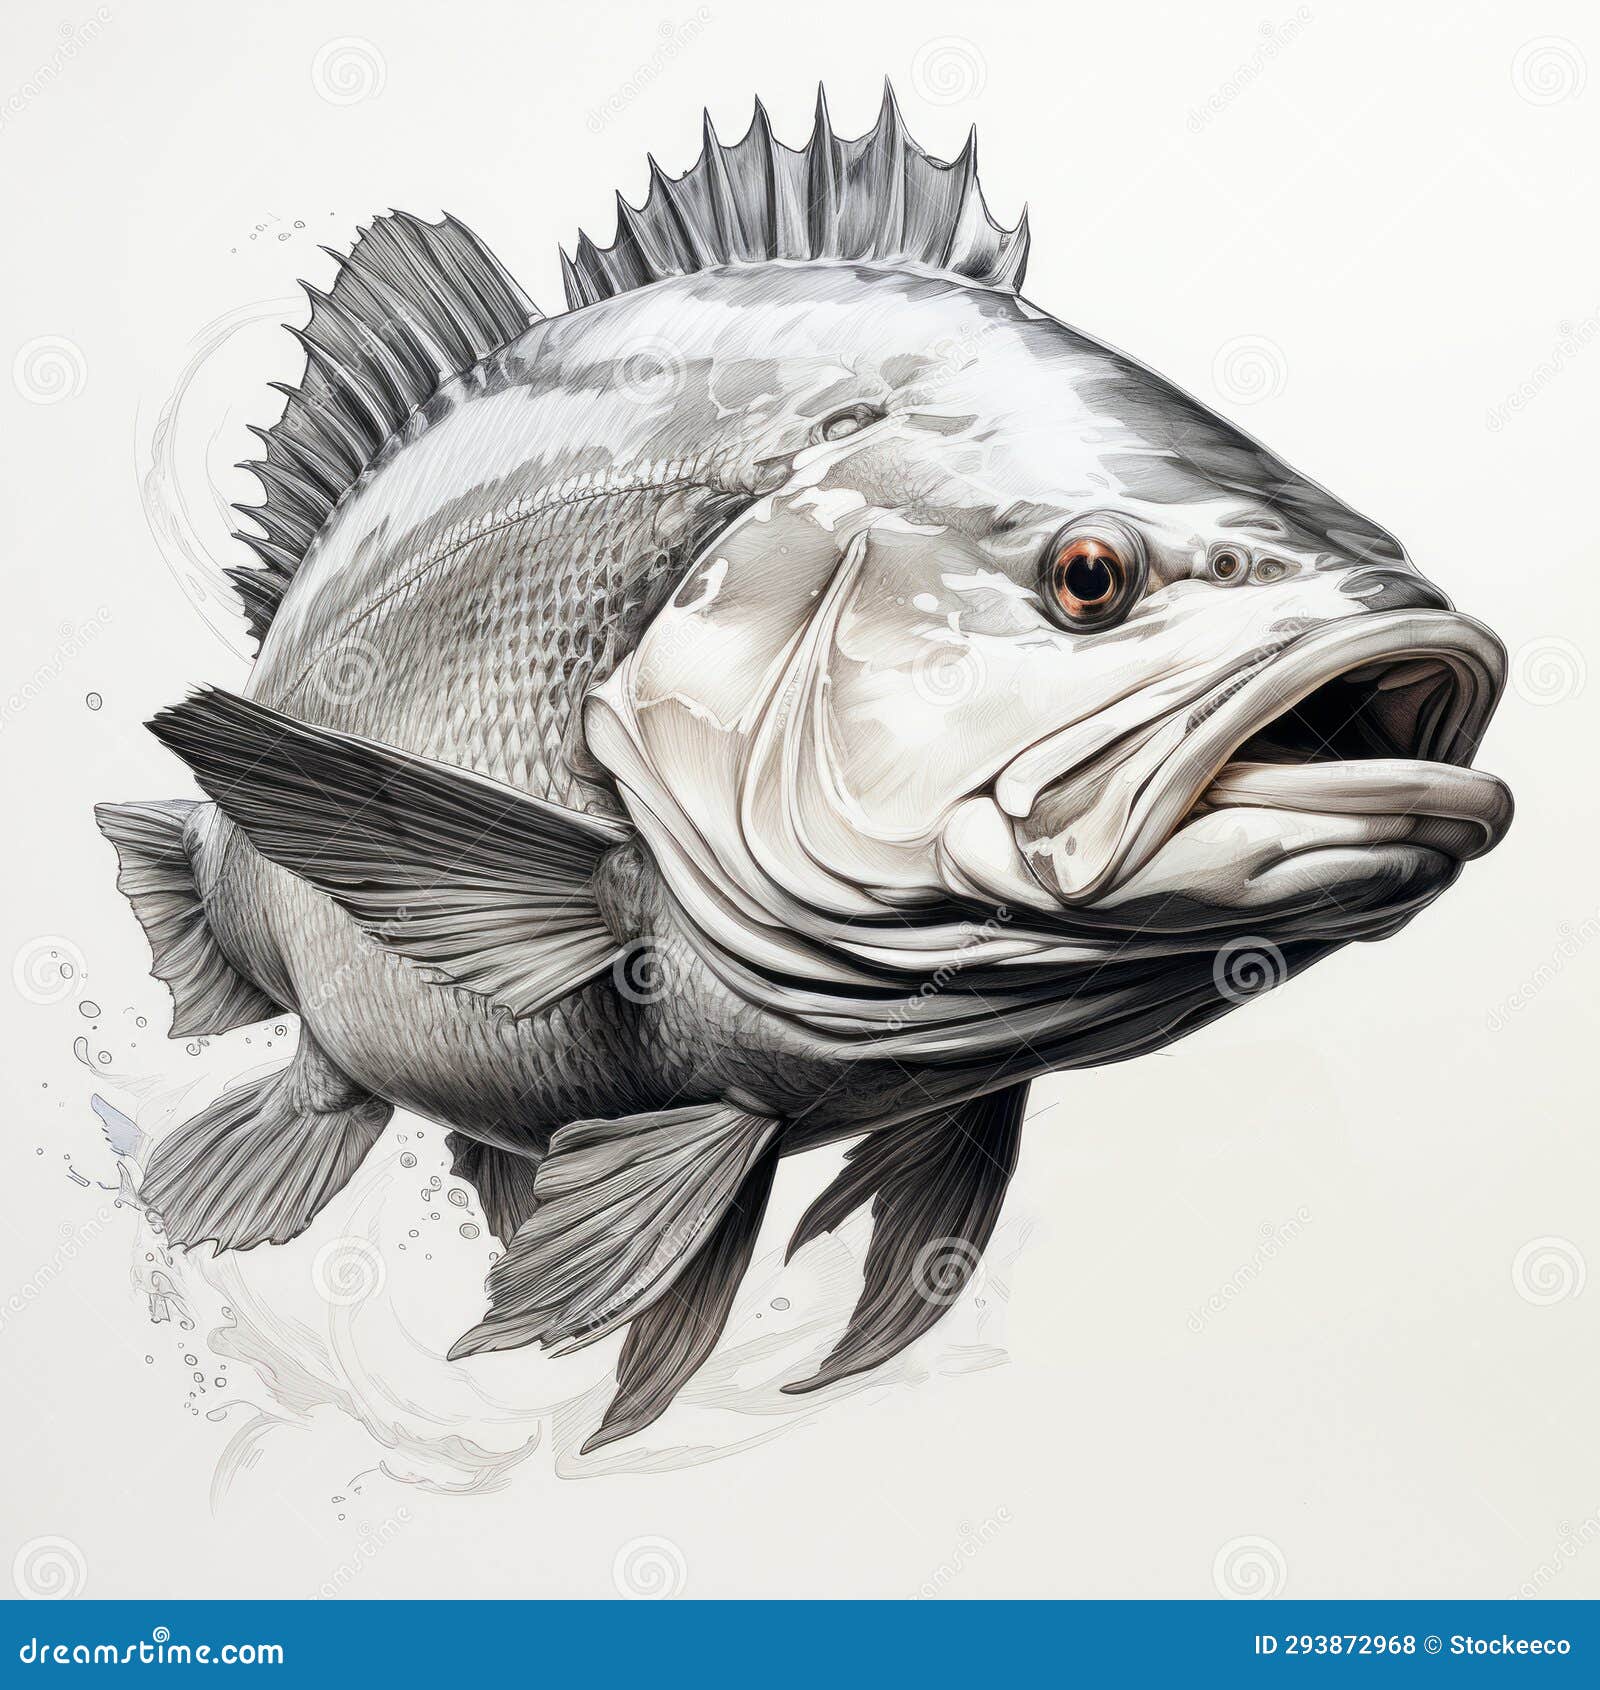 Realistic Scampi Bass Illustration: Black and White Fish Portrait Tattoo  Drawing Stock Illustration - Illustration of explosive, hyper: 293872968